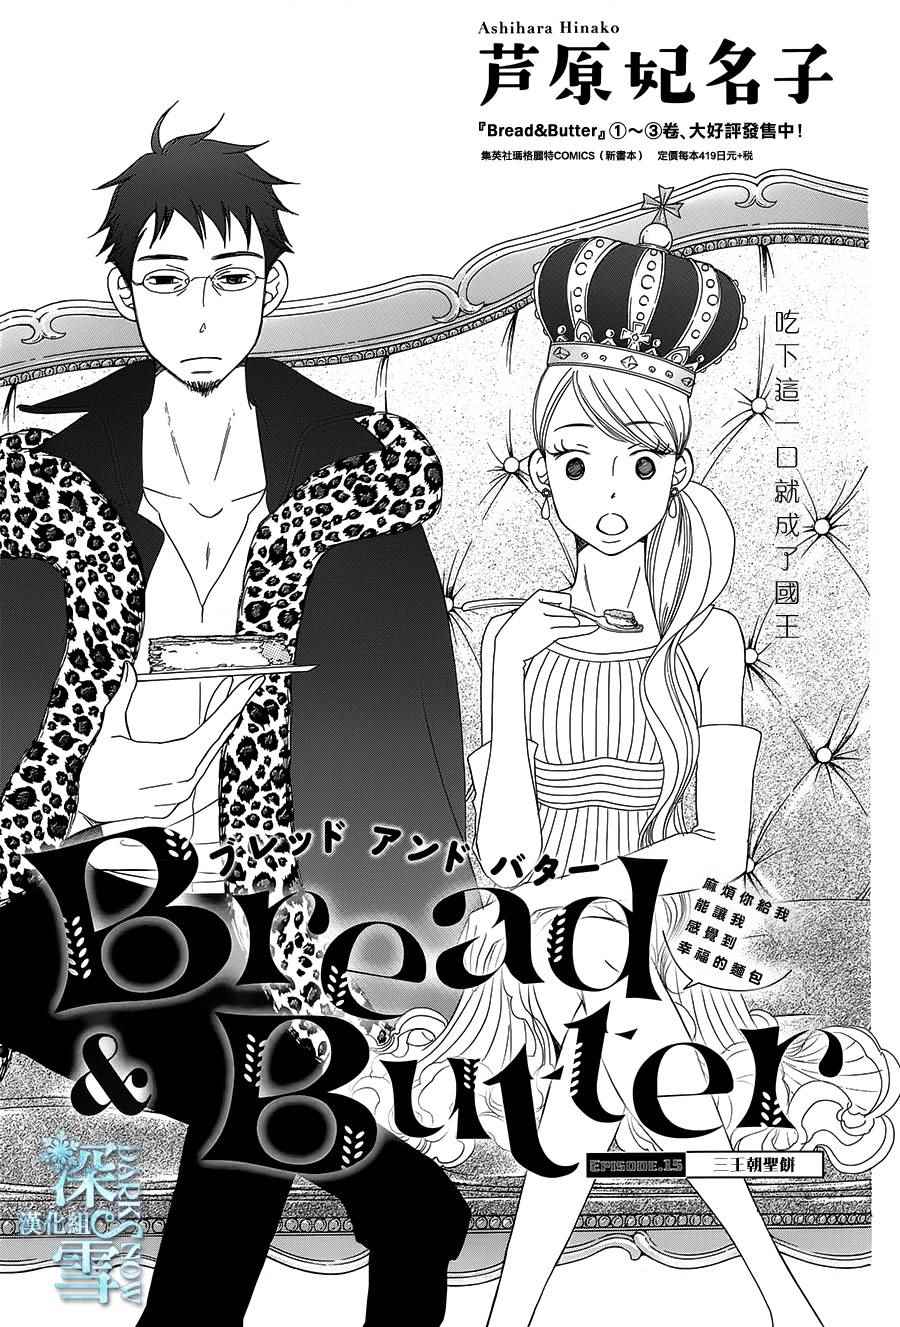 Bread&Butter - 第15話 - 1